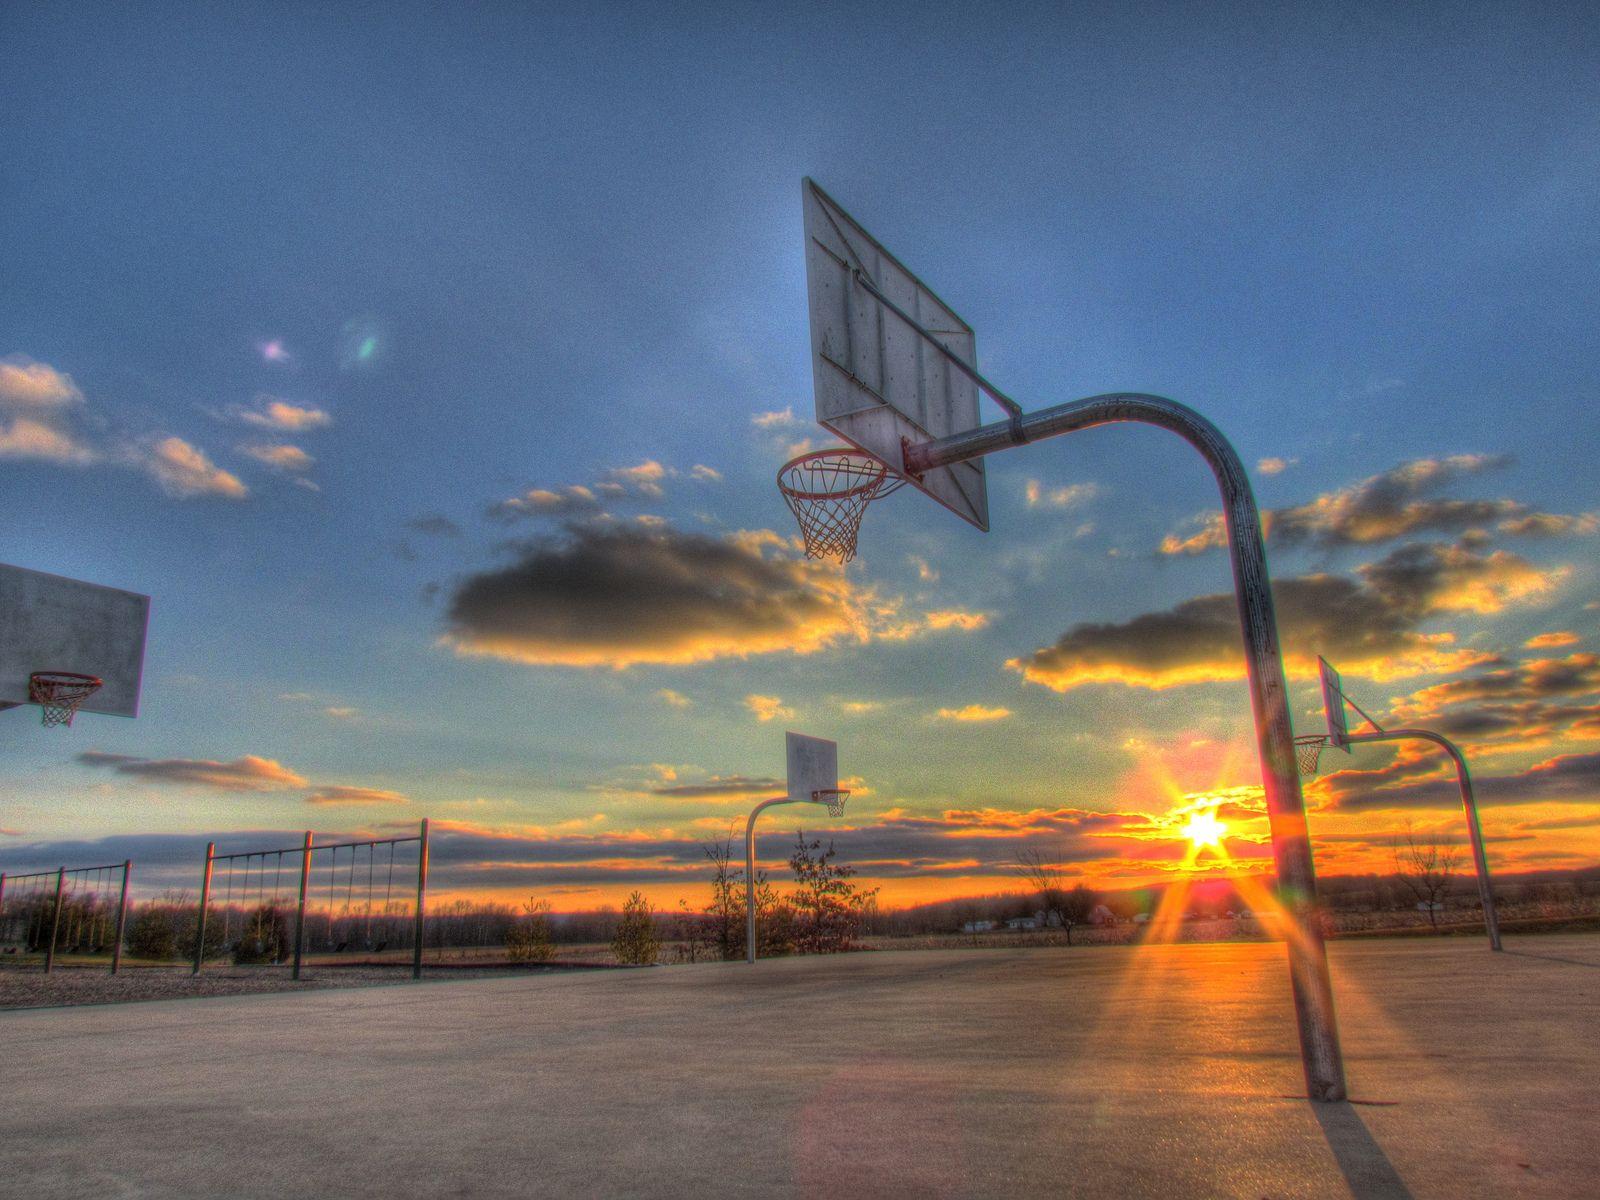 Hd Basketball Court Wallpaper For iPhone with HD Wallpaper 1600x1200